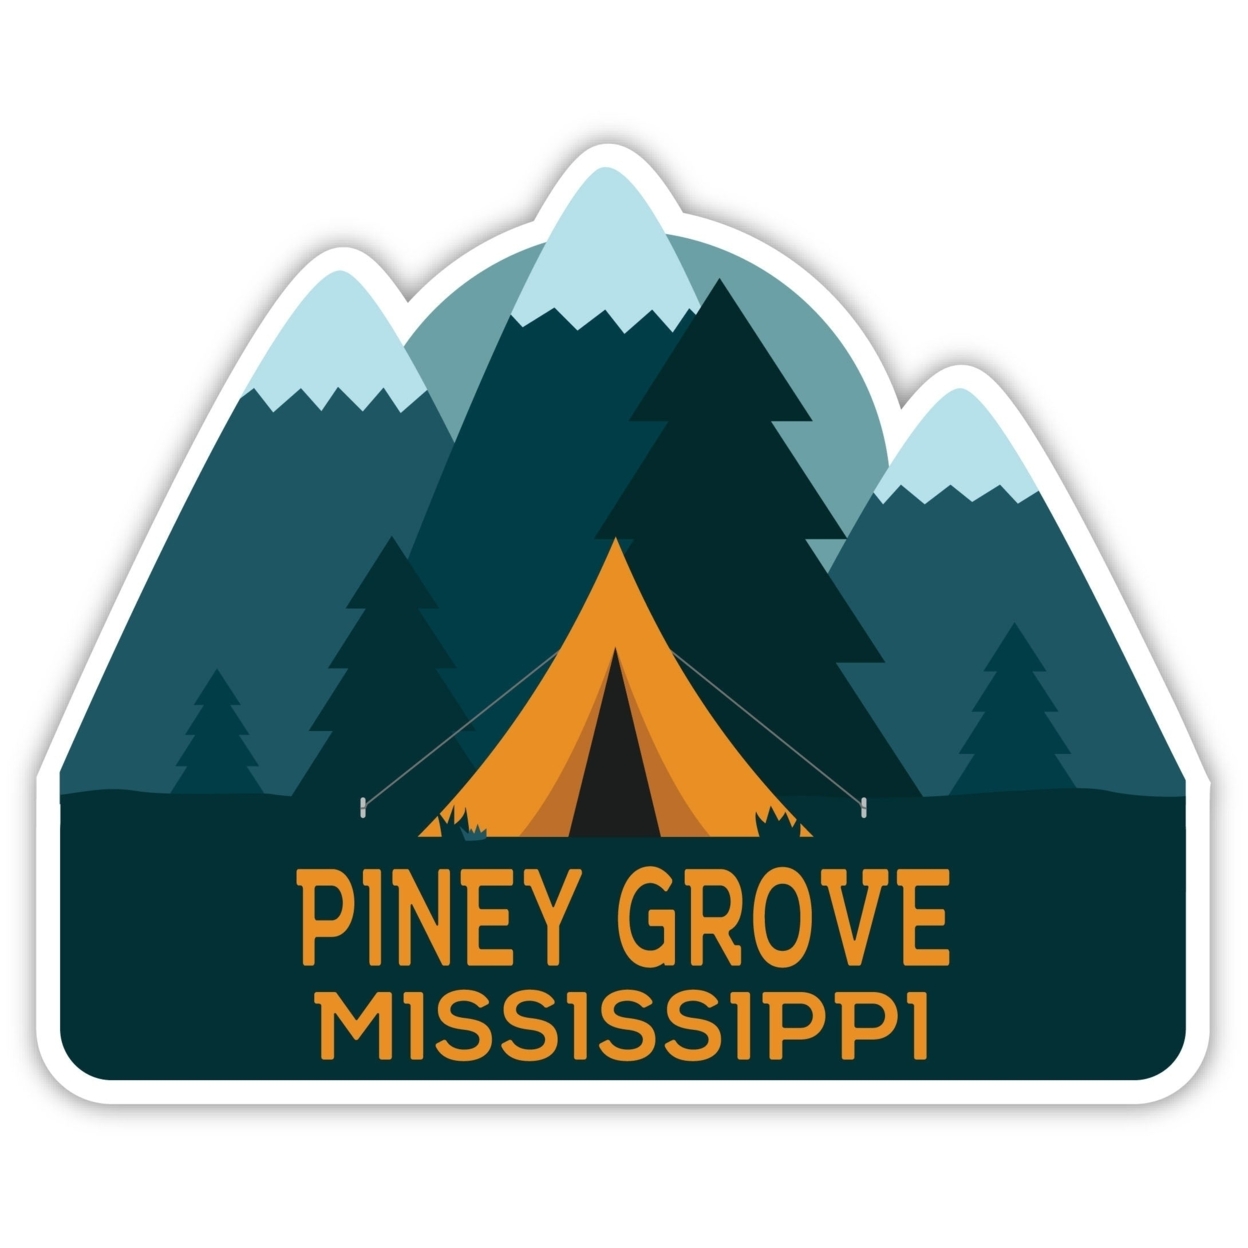 Piney Grove Mississippi Souvenir Decorative Stickers (Choose Theme And Size) - Single Unit, 2-Inch, Tent